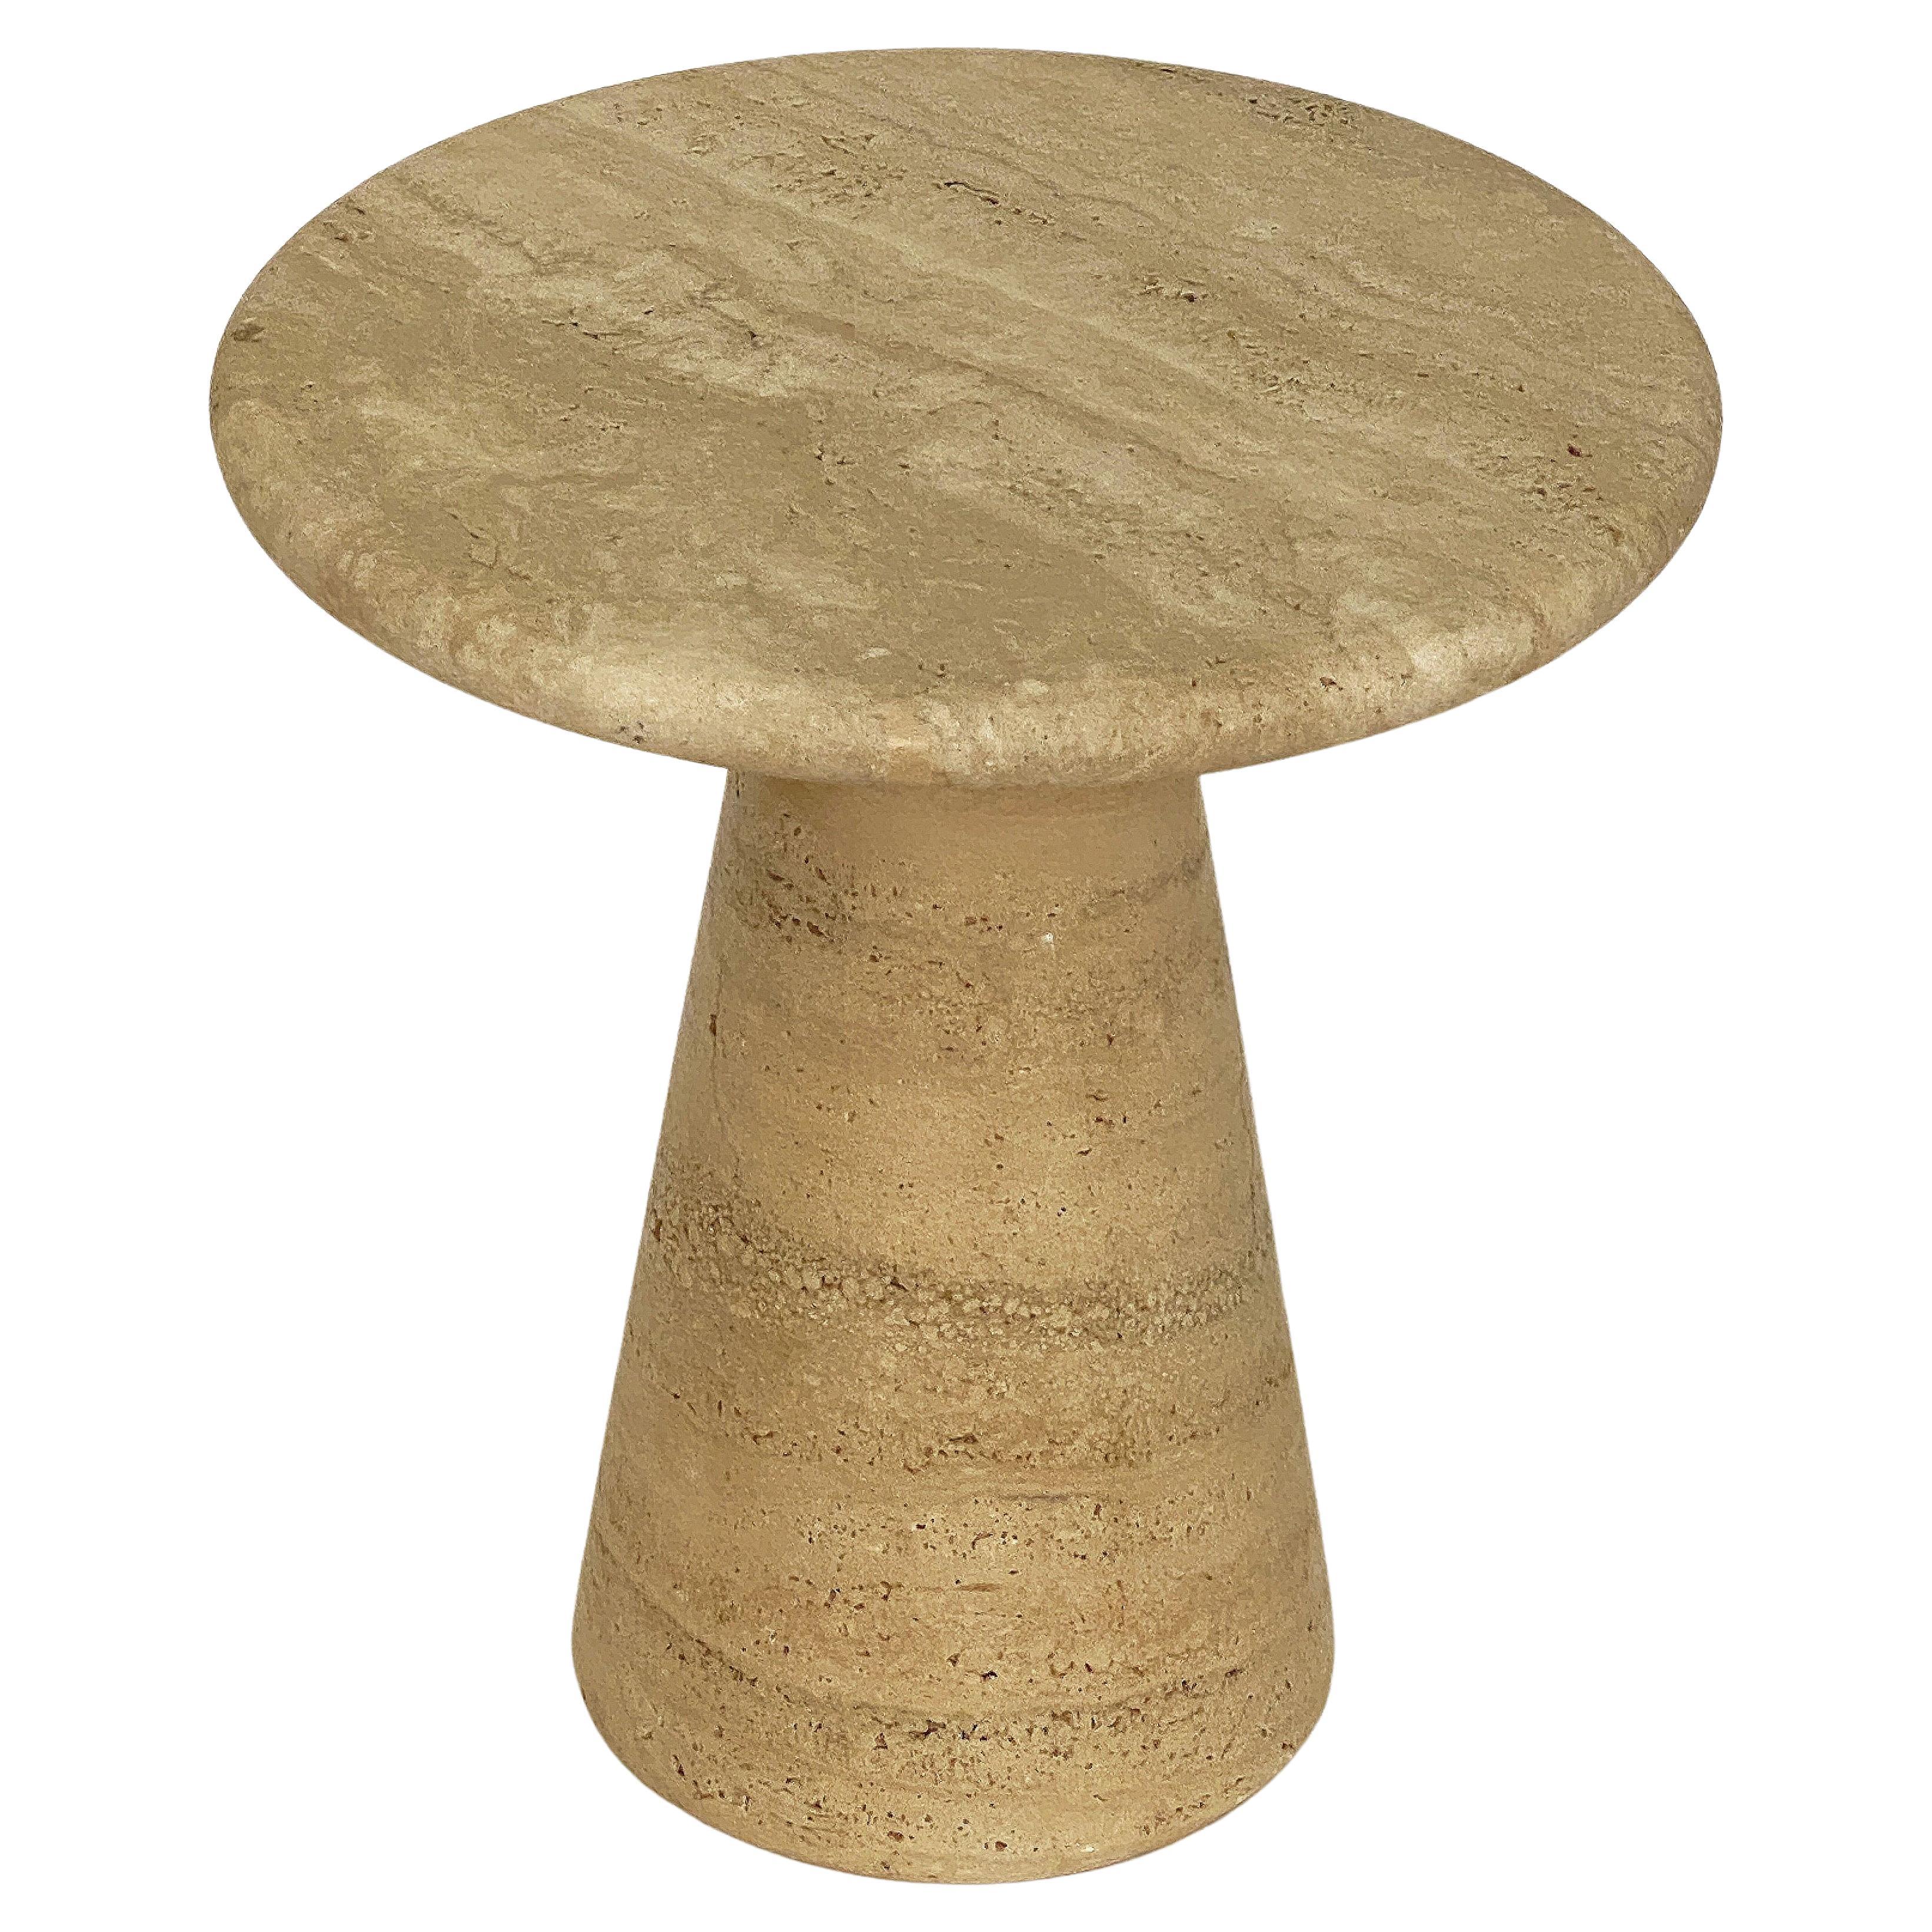 Modernist Conical Table of Travertine Stone from Italy (Four Available)